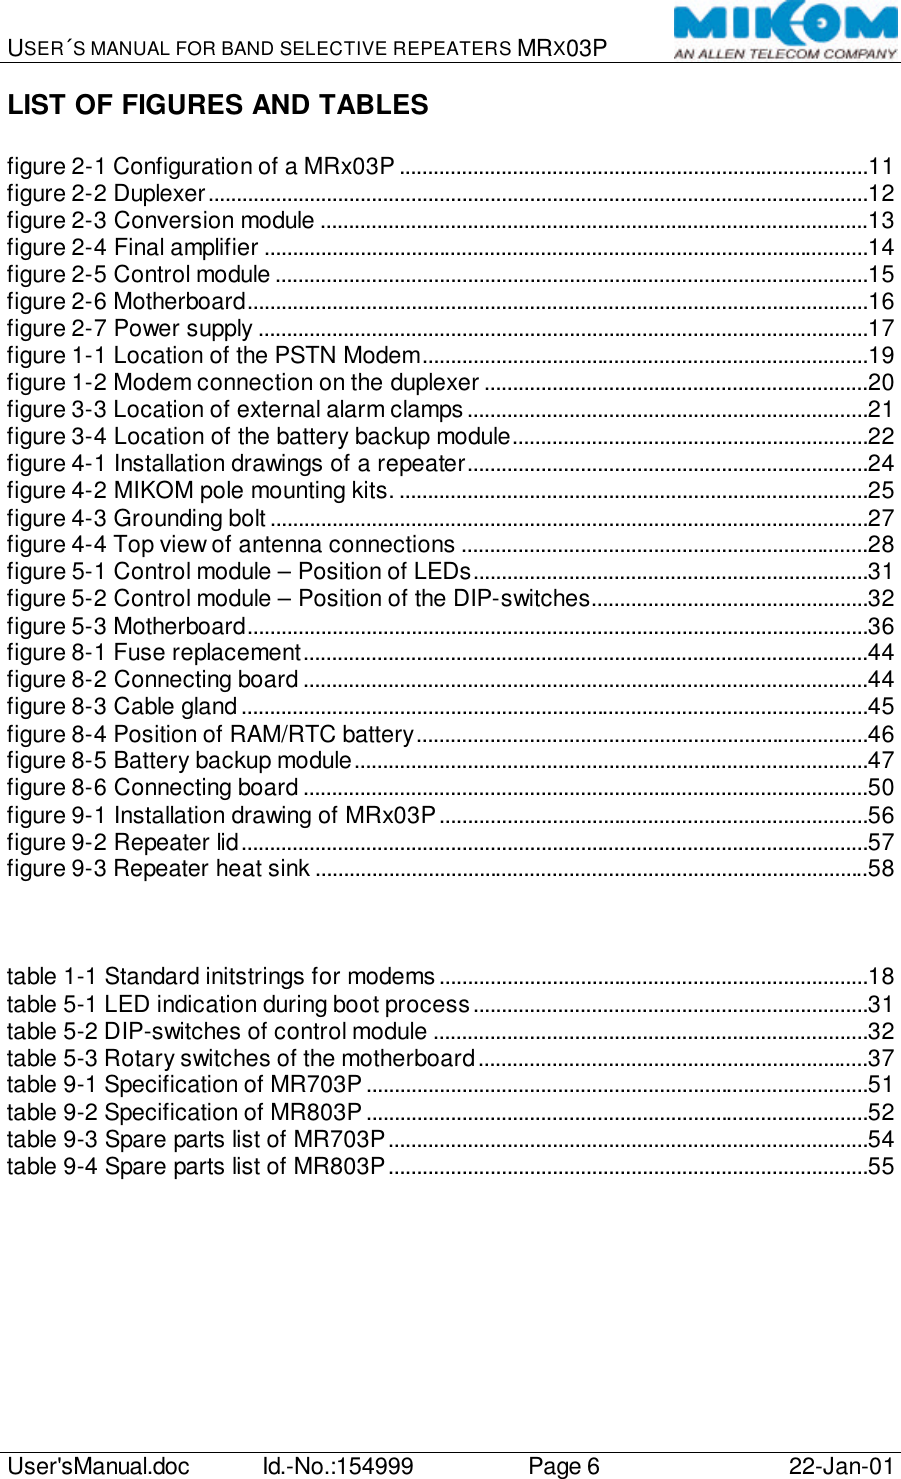 USER´S MANUAL FOR BAND SELECTIVE REPEATERS MRX03P   User&apos;sManual.doc Id.-No.:154999 Page 6 22-Jan-01  LIST OF FIGURES AND TABLES  figure 2-1 Configuration of a MRx03P ...................................................................................11 figure 2-2 Duplexer.....................................................................................................................12 figure 2-3 Conversion module .................................................................................................13 figure 2-4 Final amplifier ...........................................................................................................14 figure 2-5 Control module .........................................................................................................15 figure 2-6 Motherboard..............................................................................................................16 figure 2-7 Power supply ............................................................................................................17 figure 1-1 Location of the PSTN Modem...............................................................................19 figure 1-2 Modem connection on the duplexer ....................................................................20 figure 3-3 Location of external alarm clamps.......................................................................21 figure 3-4 Location of the battery backup module...............................................................22 figure 4-1 Installation drawings of a repeater.......................................................................24 figure 4-2 MIKOM pole mounting kits. ...................................................................................25 figure 4-3 Grounding bolt ..........................................................................................................27 figure 4-4 Top view of antenna connections ........................................................................28 figure 5-1 Control module – Position of LEDs......................................................................31 figure 5-2 Control module – Position of the DIP-switches.................................................32 figure 5-3 Motherboard..............................................................................................................36 figure 8-1 Fuse replacement....................................................................................................44 figure 8-2 Connecting board ....................................................................................................44 figure 8-3 Cable gland ...............................................................................................................45 figure 8-4 Position of RAM/RTC battery................................................................................46 figure 8-5 Battery backup module...........................................................................................47 figure 8-6 Connecting board ....................................................................................................50 figure 9-1 Installation drawing of MRx03P............................................................................56 figure 9-2 Repeater lid...............................................................................................................57 figure 9-3 Repeater heat sink ..................................................................................................58    table 1-1 Standard initstrings for modems............................................................................18 table 5-1 LED indication during boot process......................................................................31 table 5-2 DIP-switches of control module .............................................................................32 table 5-3 Rotary switches of the motherboard.....................................................................37 table 9-1 Specification of MR703P .........................................................................................51 table 9-2 Specification of MR803P .........................................................................................52 table 9-3 Spare parts list of MR703P.....................................................................................54 table 9-4 Spare parts list of MR803P.....................................................................................55  